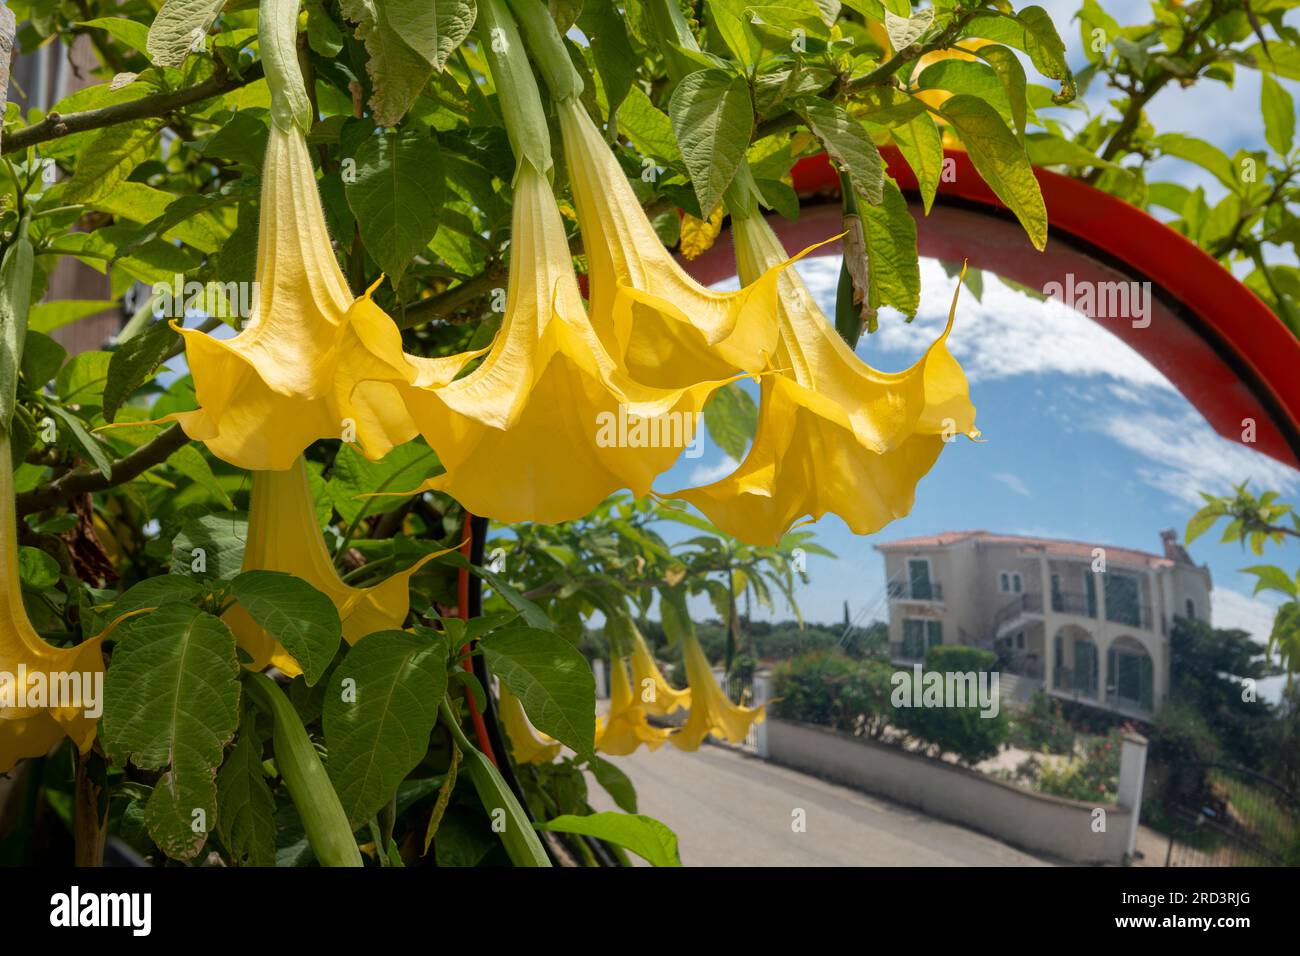 Flora of Kefalonia, Greece, yellow brugmansia suaveolens in springtime reflected in a roadside access warning mirror in a circular red frame Stock Photo